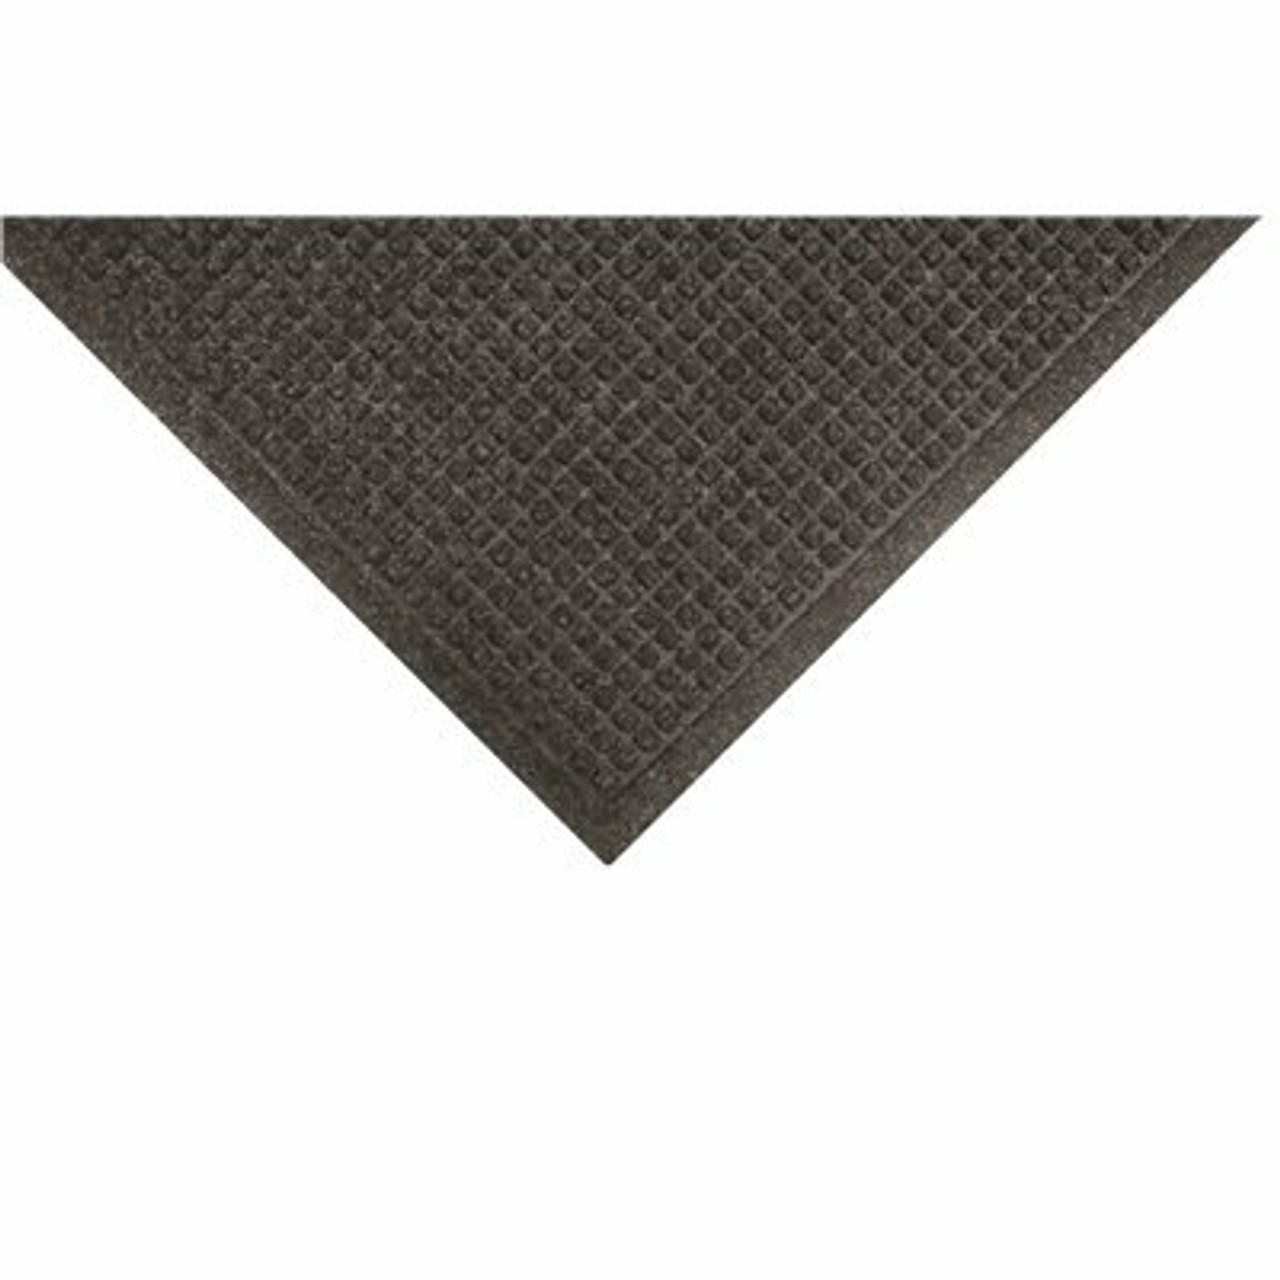 M+A Matting Waterhog Fashion Charcoal 116 In. X 35 In. Commercial Floor Mat